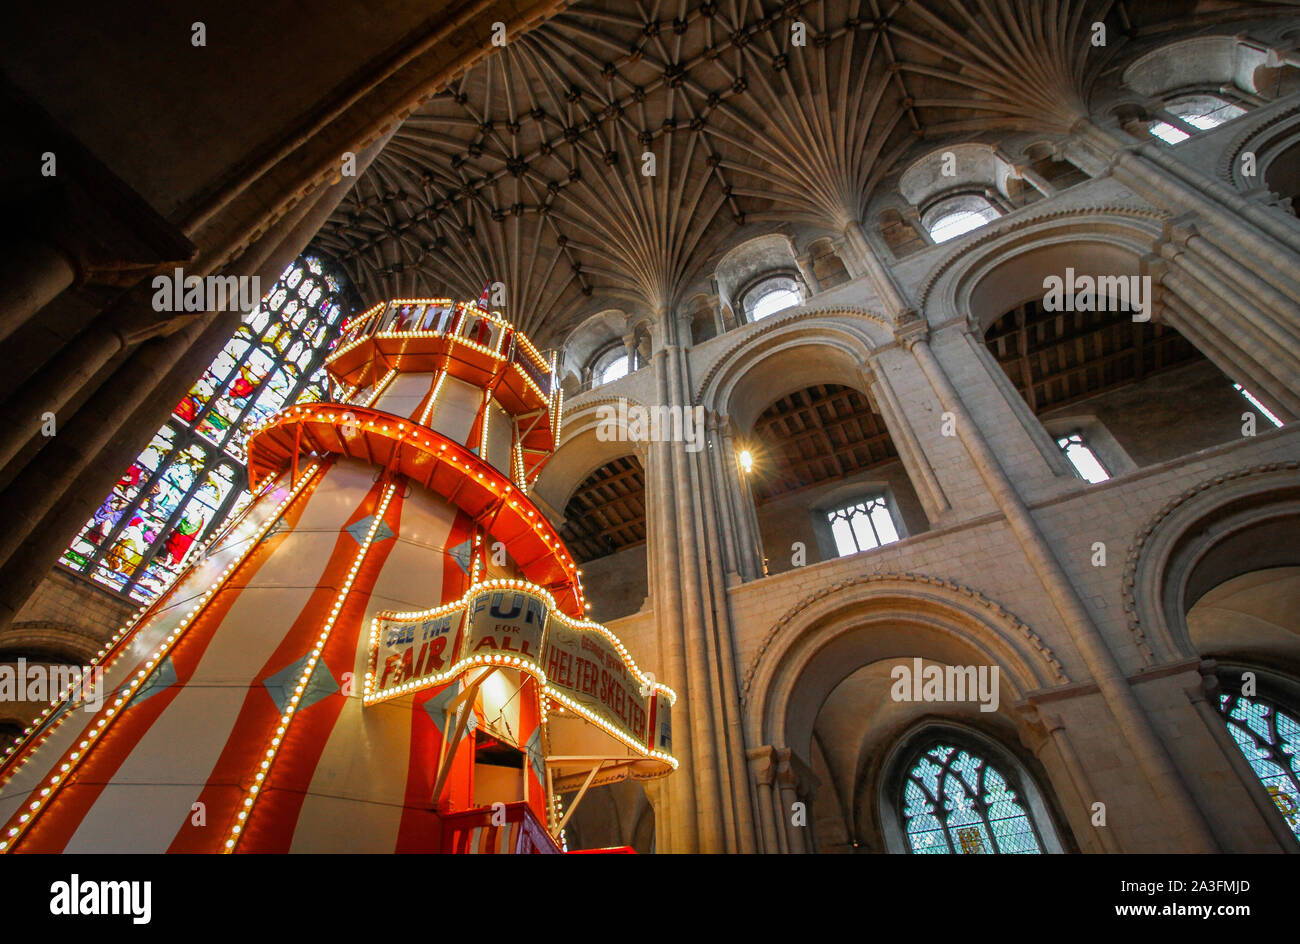 Helter Skelter all'interno di Norwich Cathedral Foto Stock